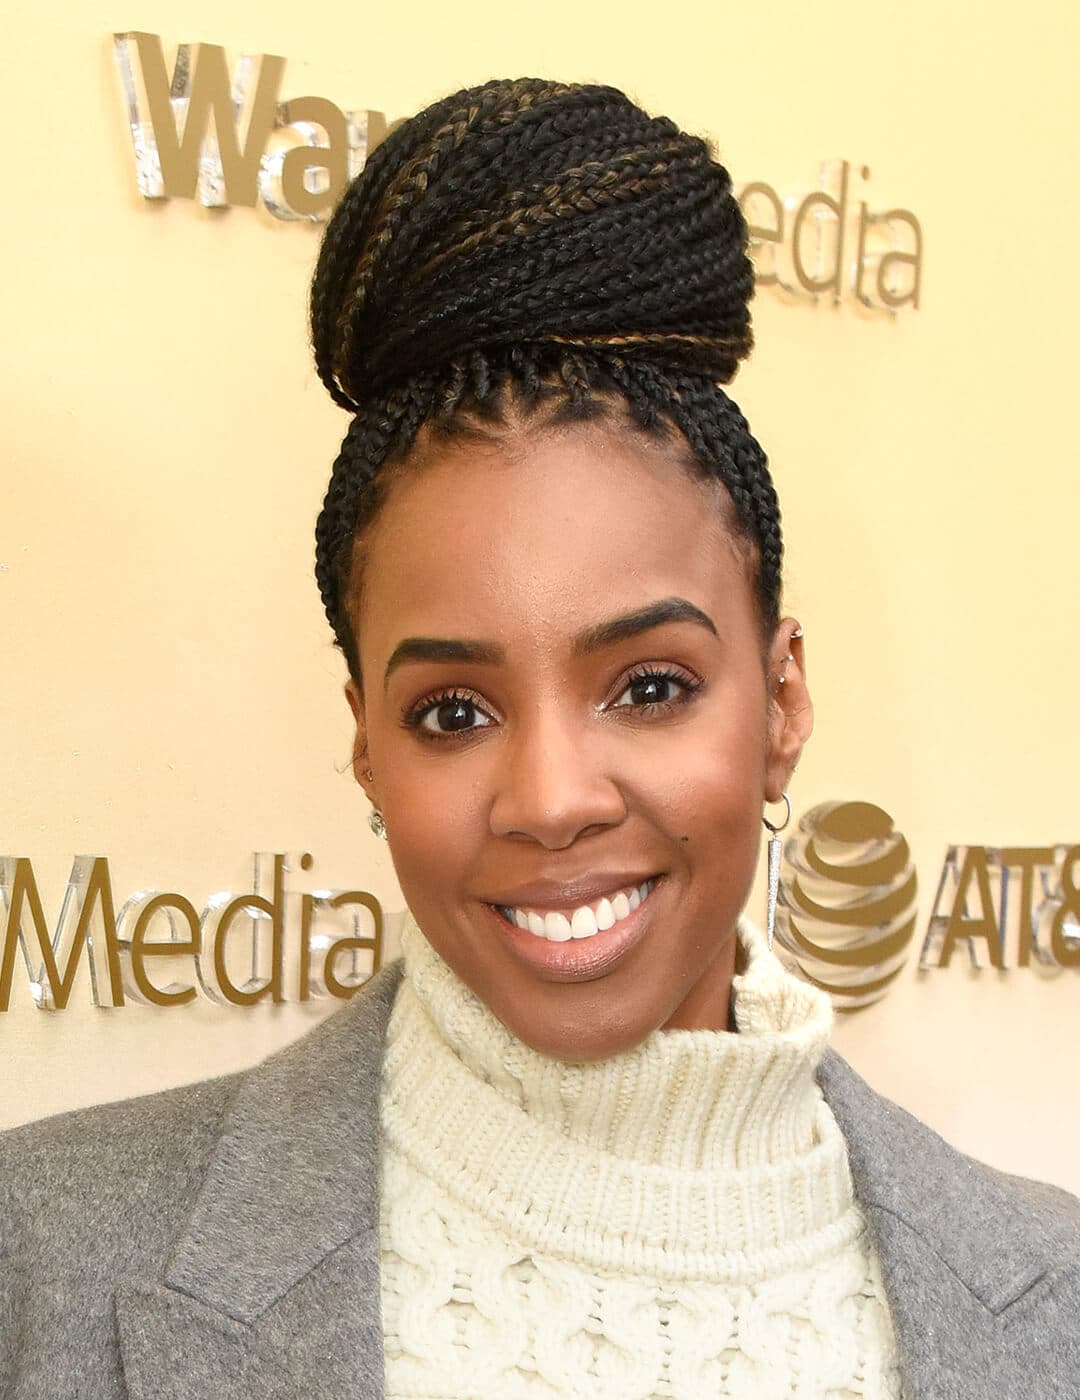 Kelly Rowland in an offwhite turtle neck sweater and grey coat rocking a braided top knot hairstyle